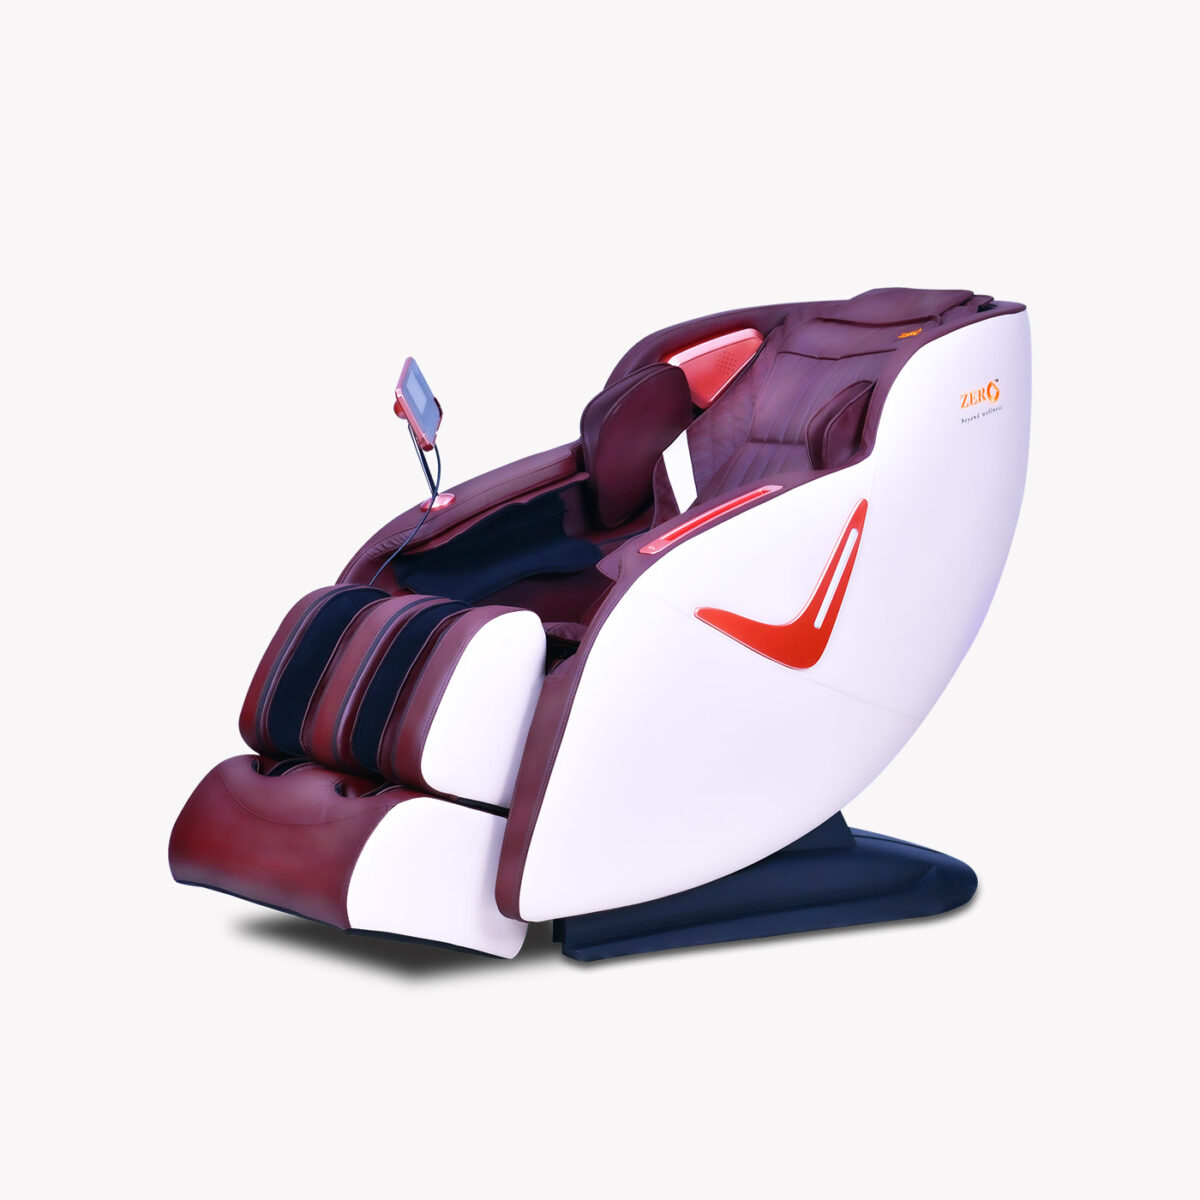 Can I customize the massage settings on a massage chair?